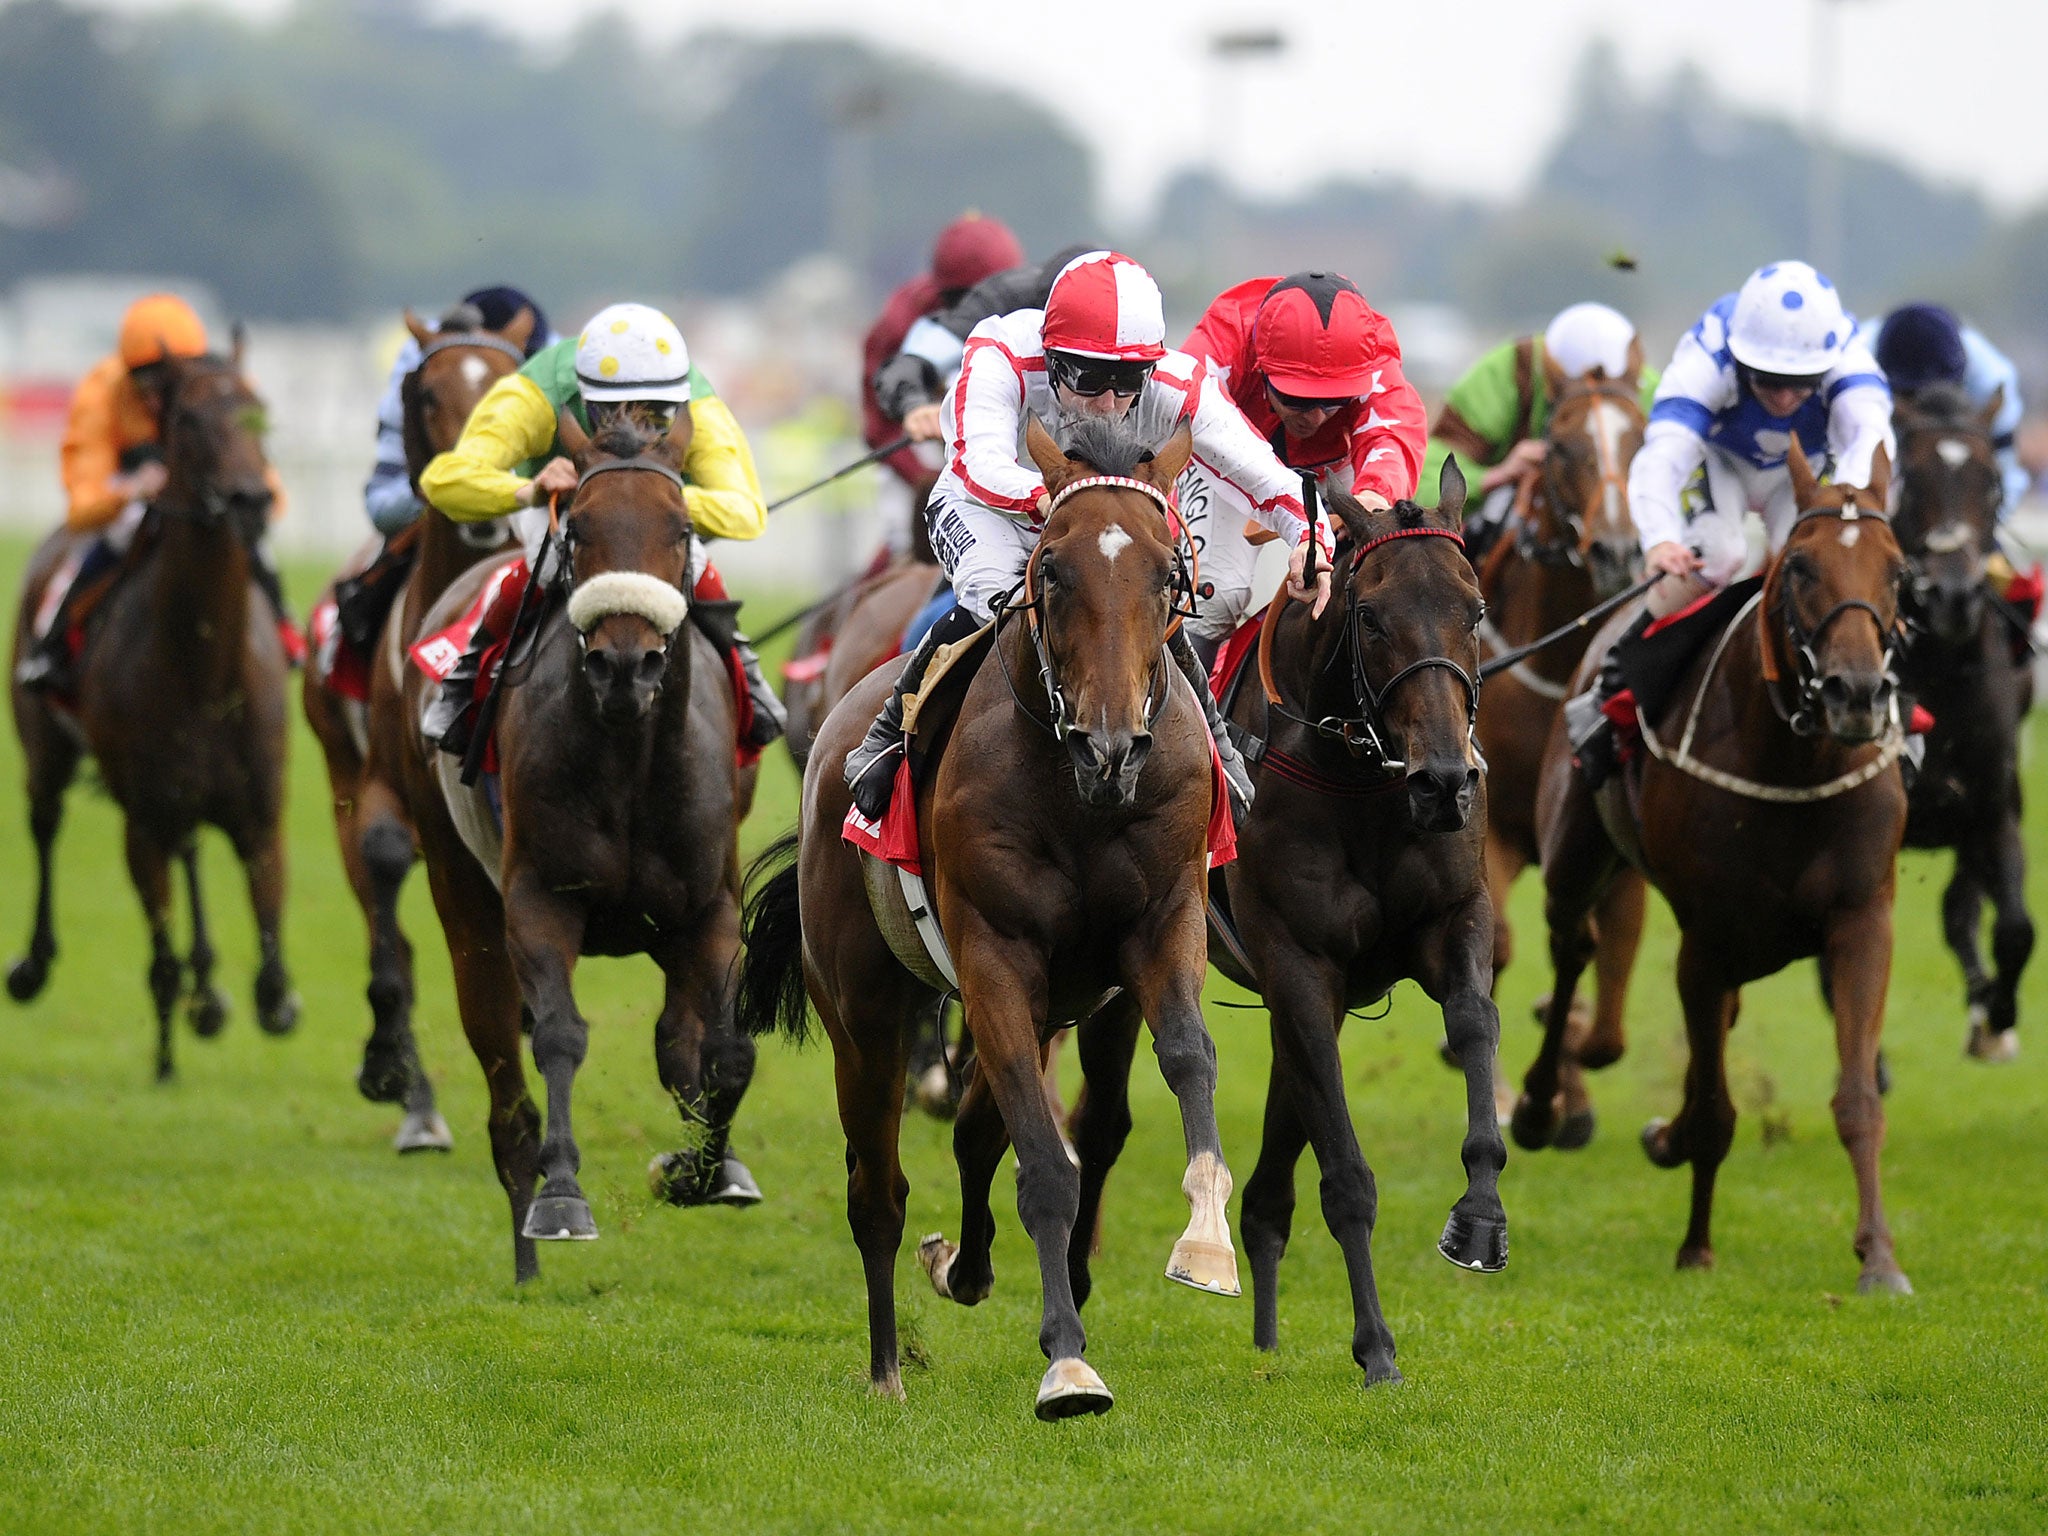 Tom Queally, the jockey, judges the finish perfectly as Tiger Cliff wins the Ebor Handicap